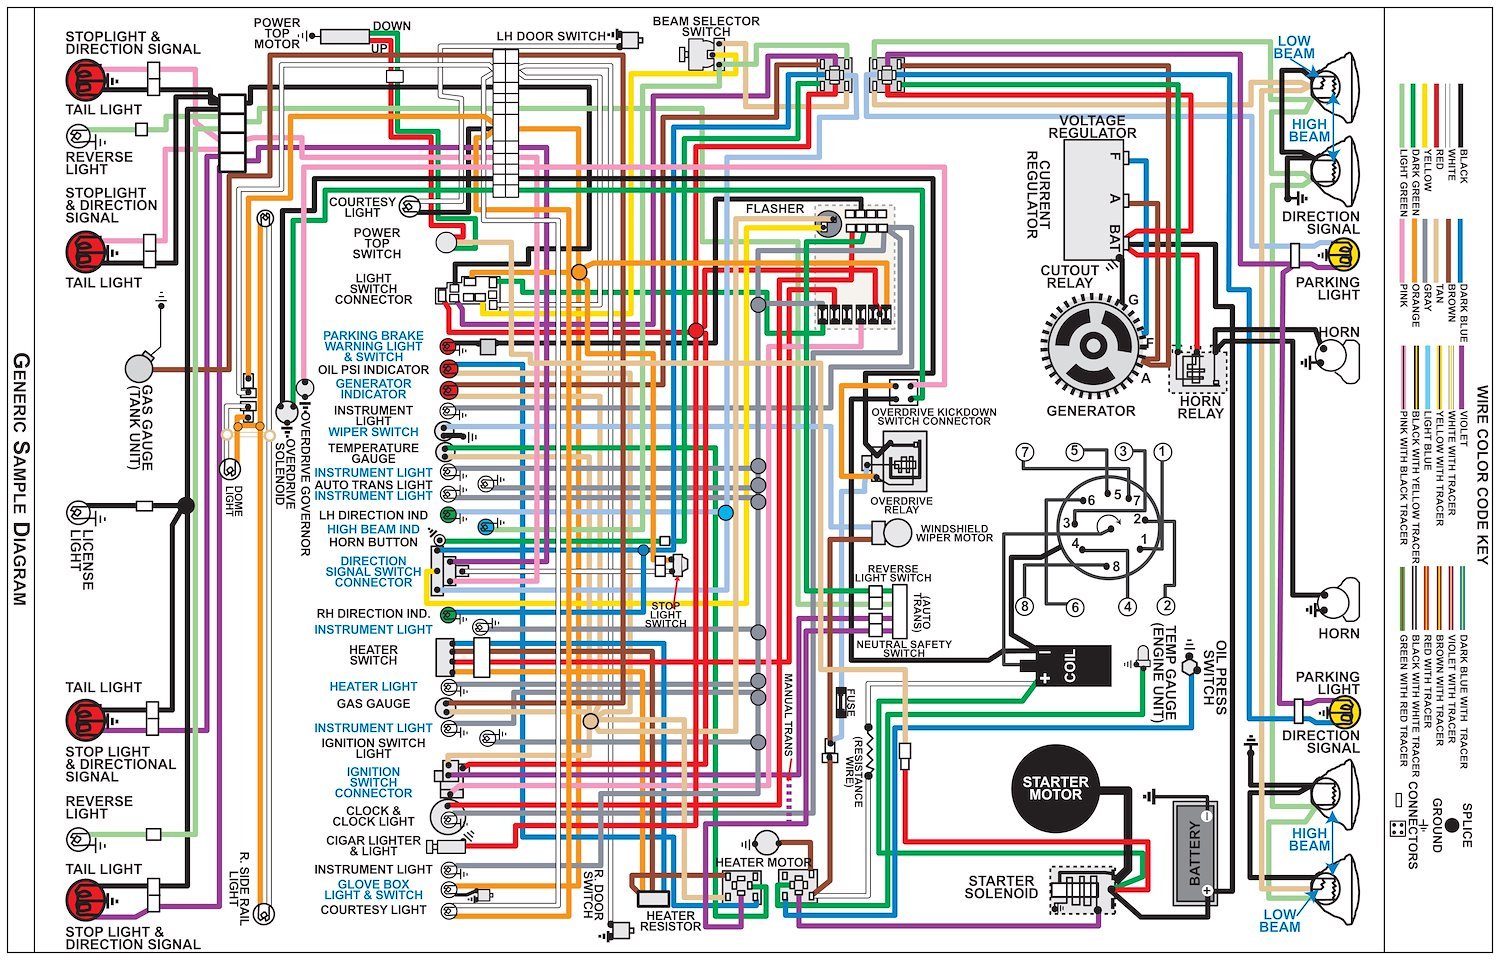 Wiring Diagram for 1970 Dodge Challenger with Standard